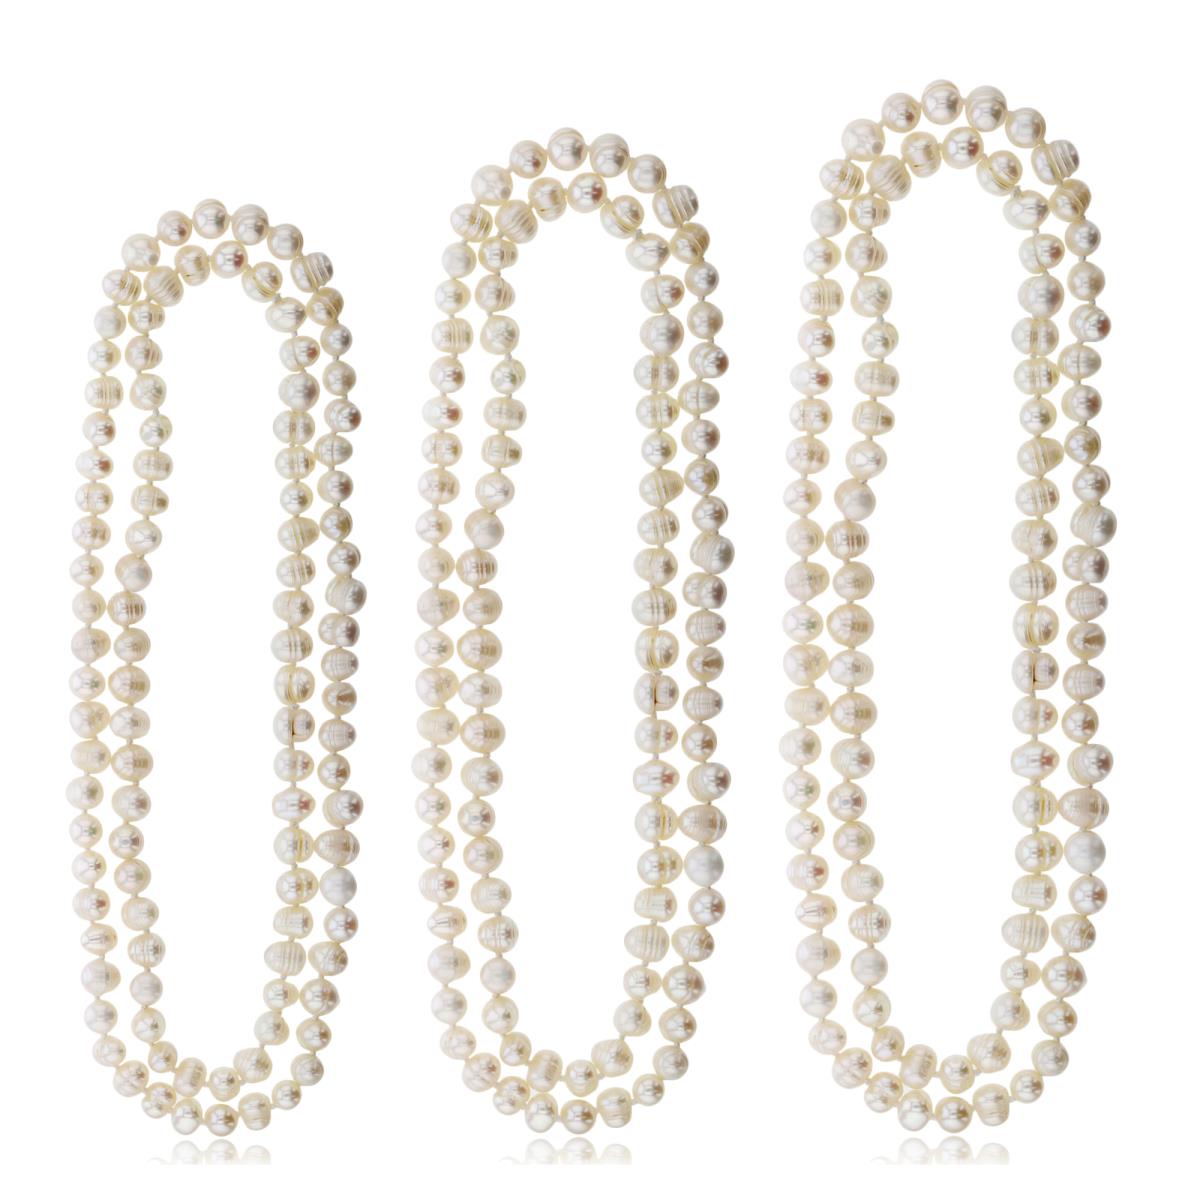 8-9mm Semi Baroque Fresh Water Pearl 24",30" & 36" Endless Necklace Set of 3